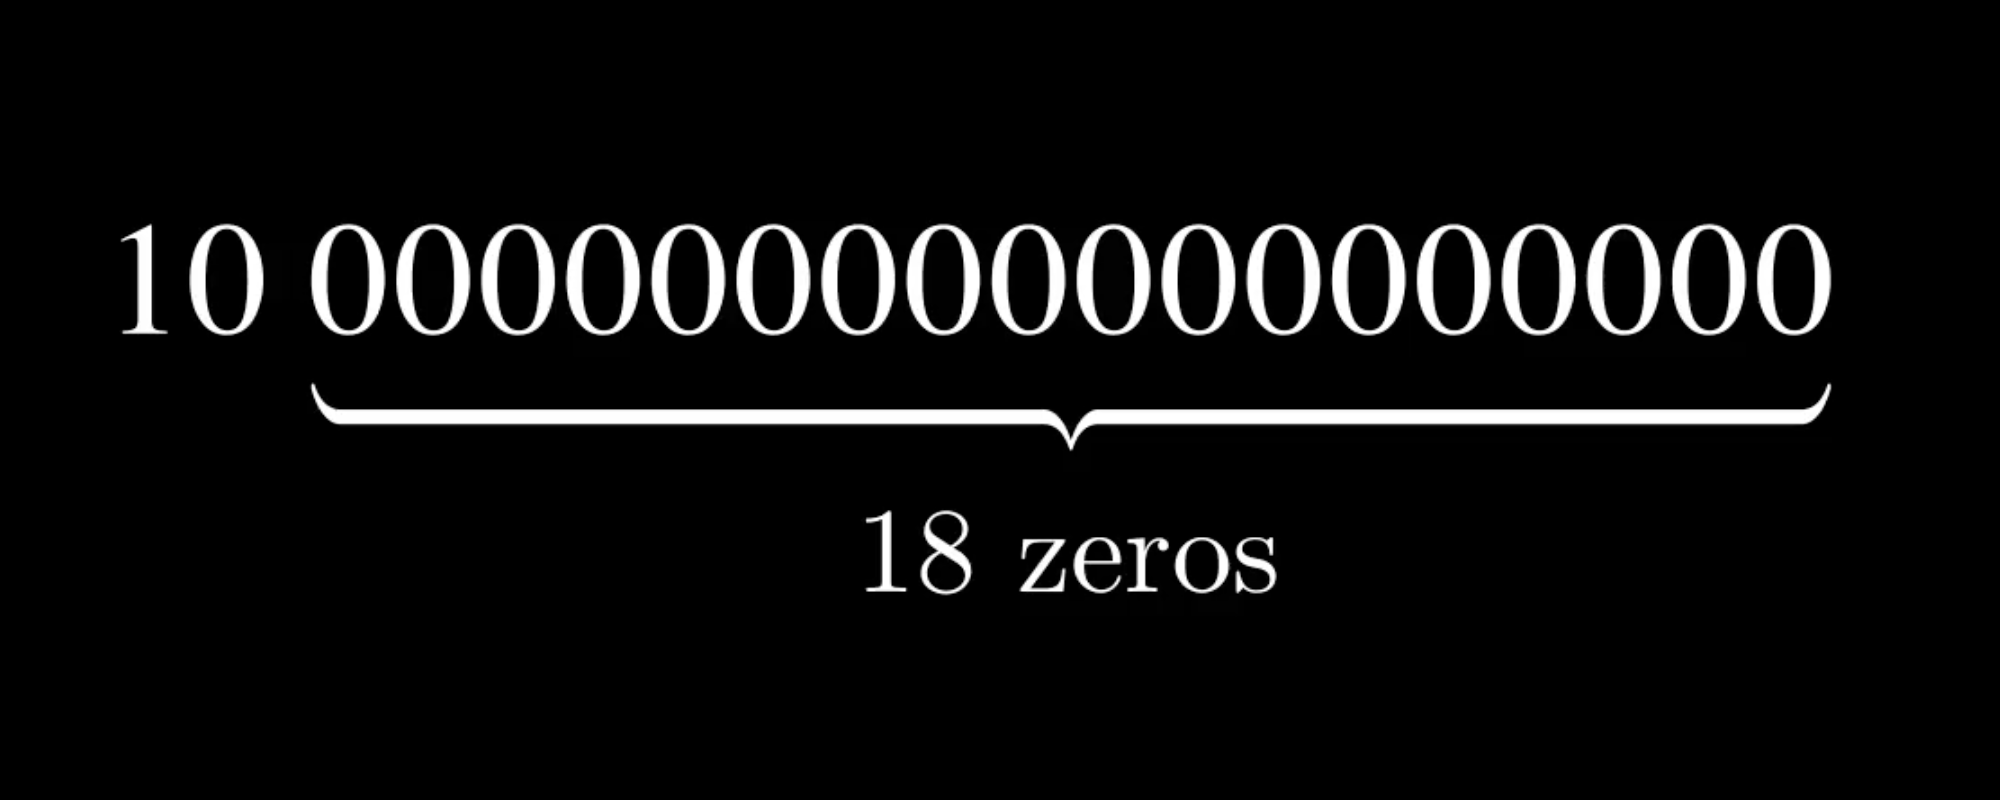 Image 1: 10 ^ 18 with an emphasis on the 18 zeros